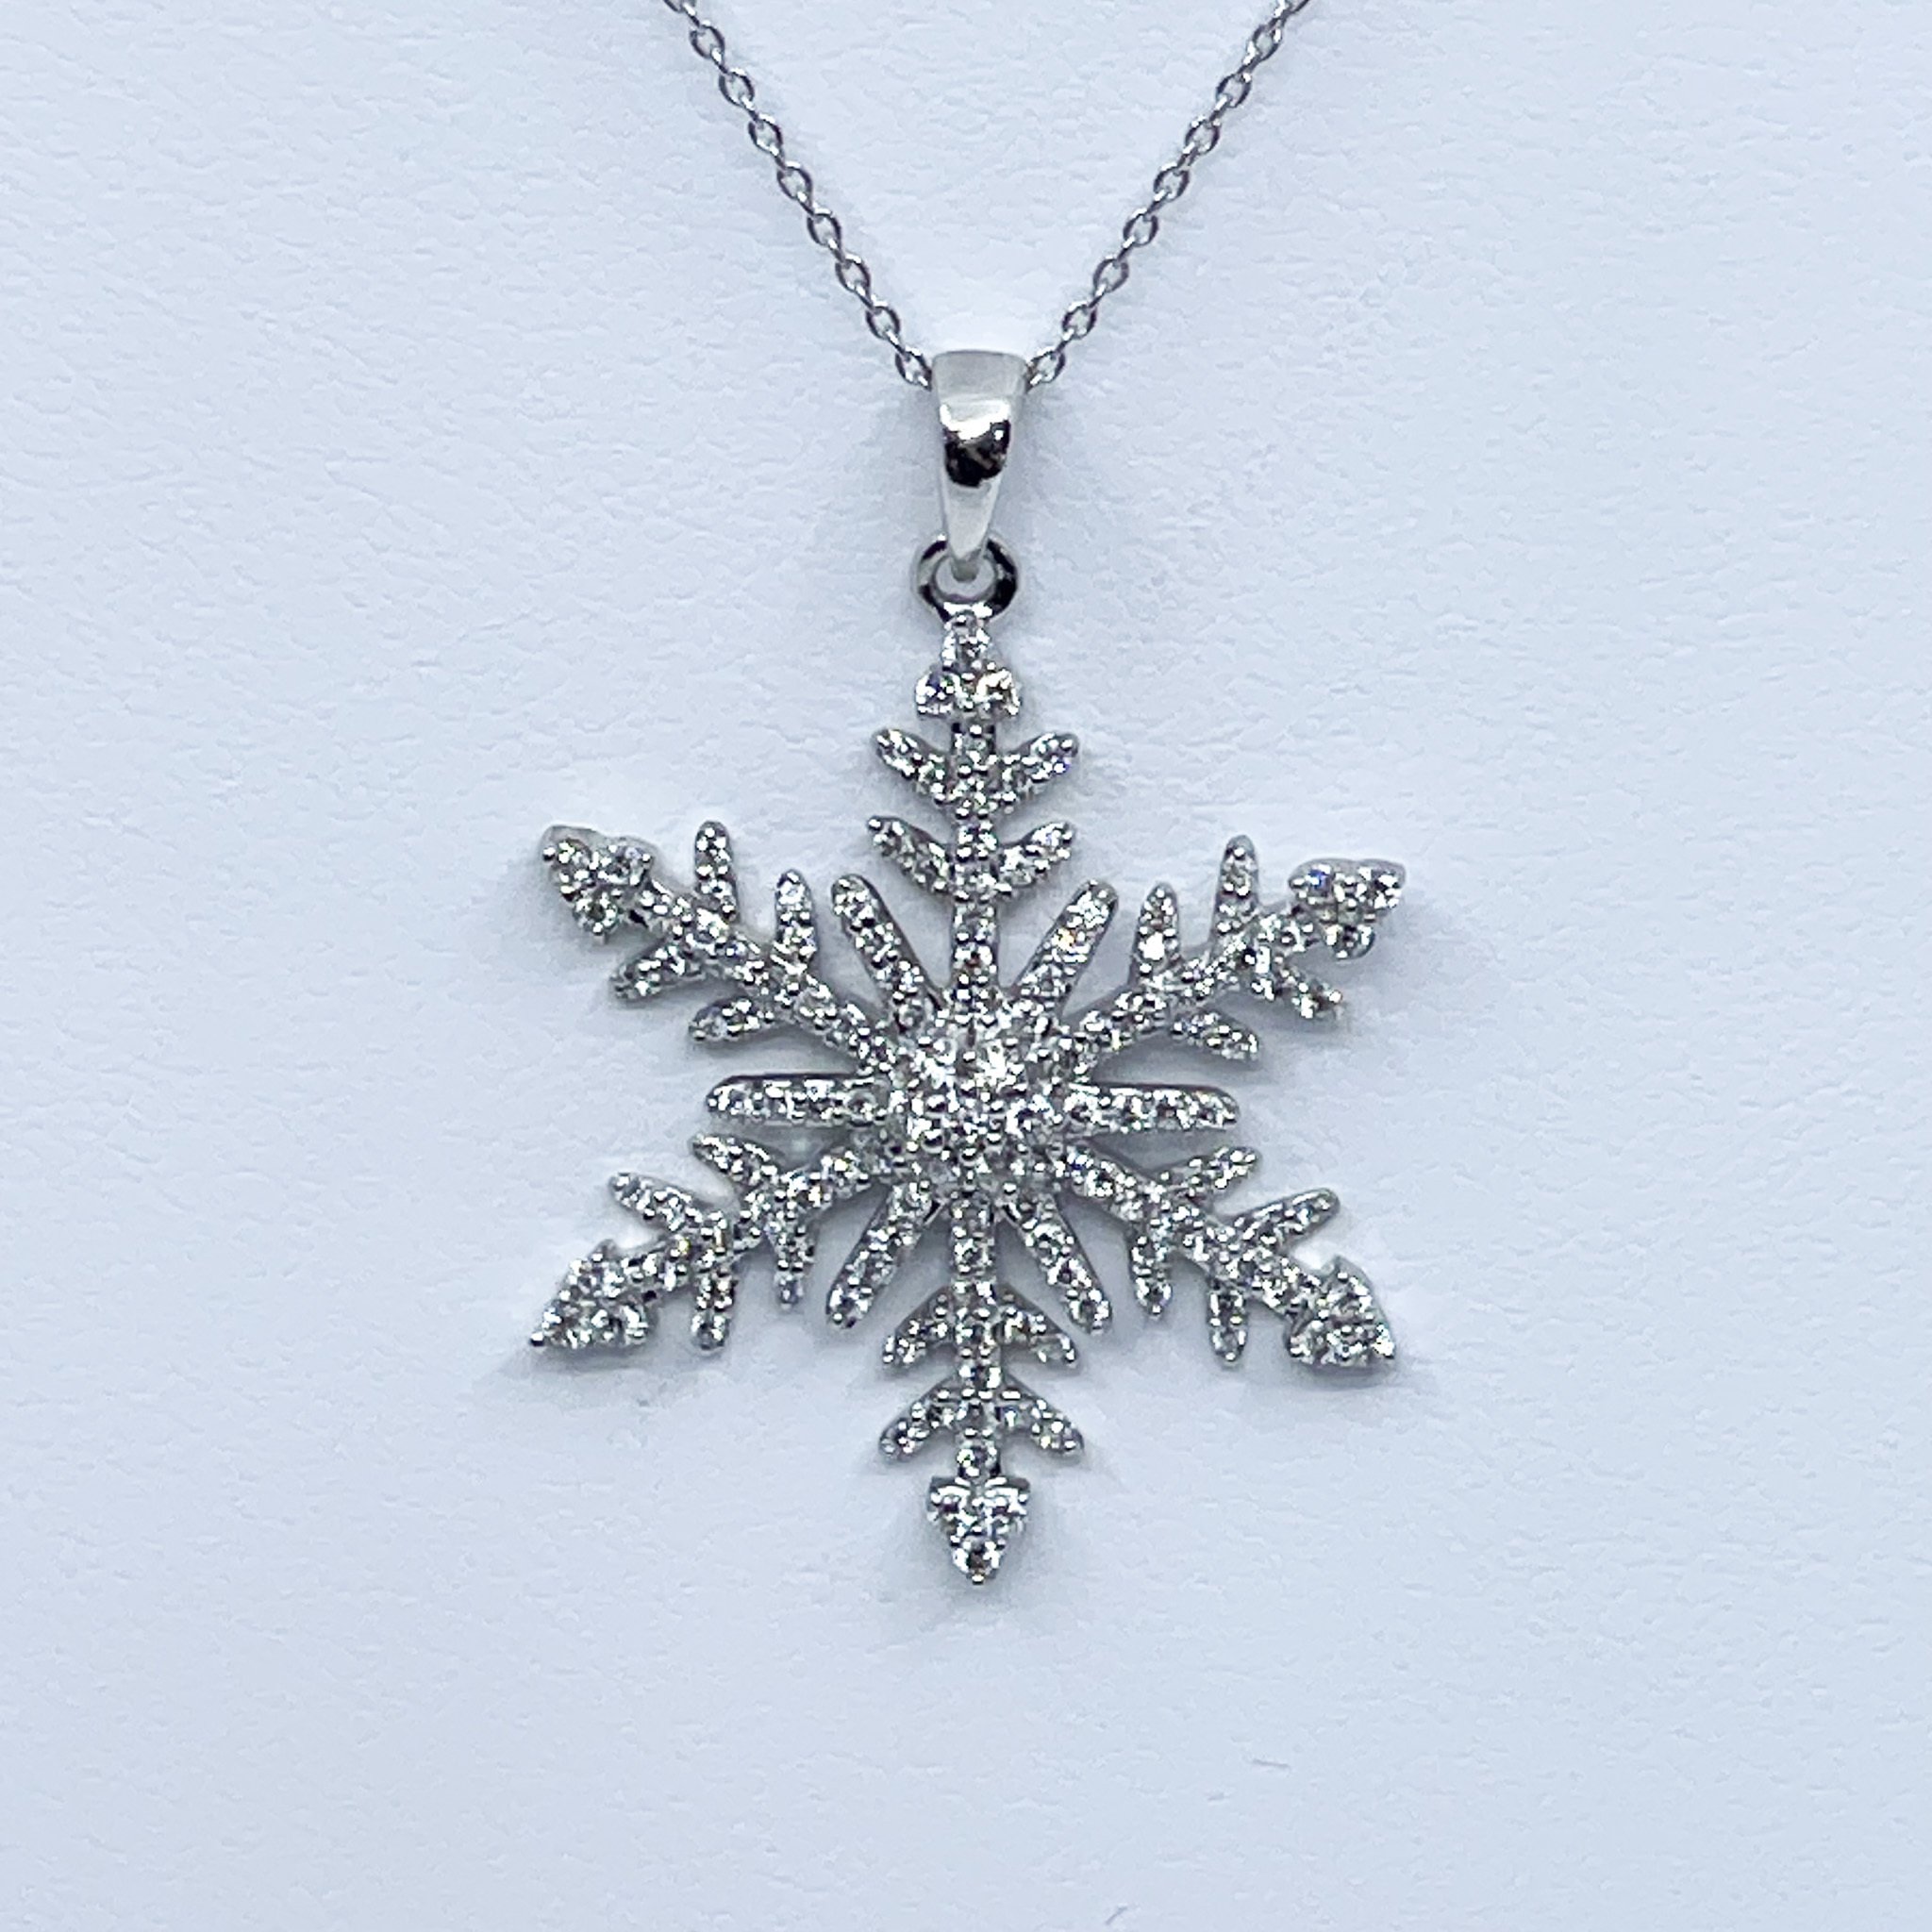 Amazon.com: Sterling Silver Snowflake Necklace, Delicate and Dainty Snowflake  Necklace for Women, Snowflake Necklace for Girls, 18 inches : Handmade  Products